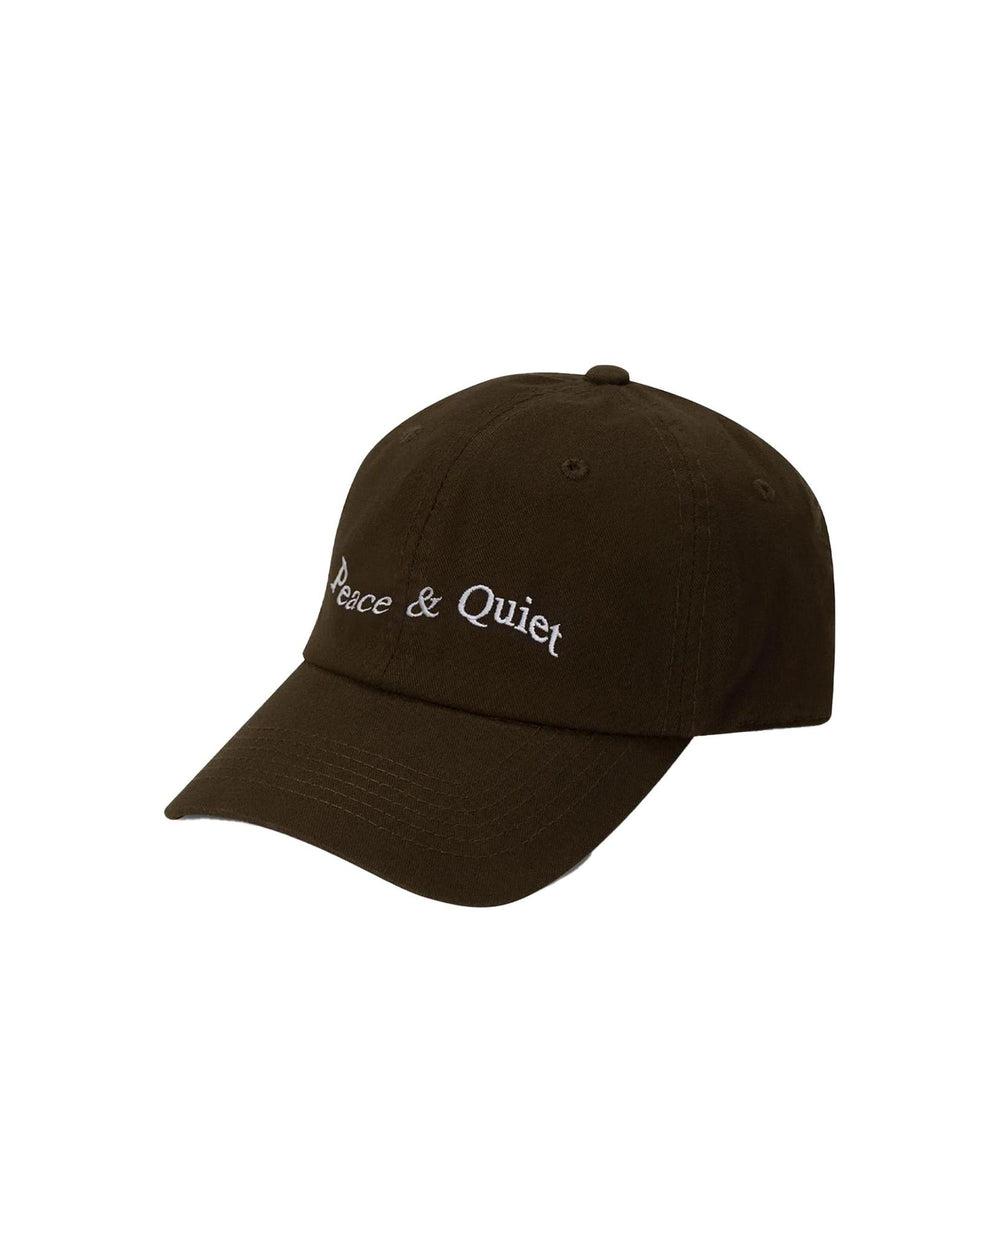 Museum of Peace and Quiet Wordmark Dad Hat | STASHED